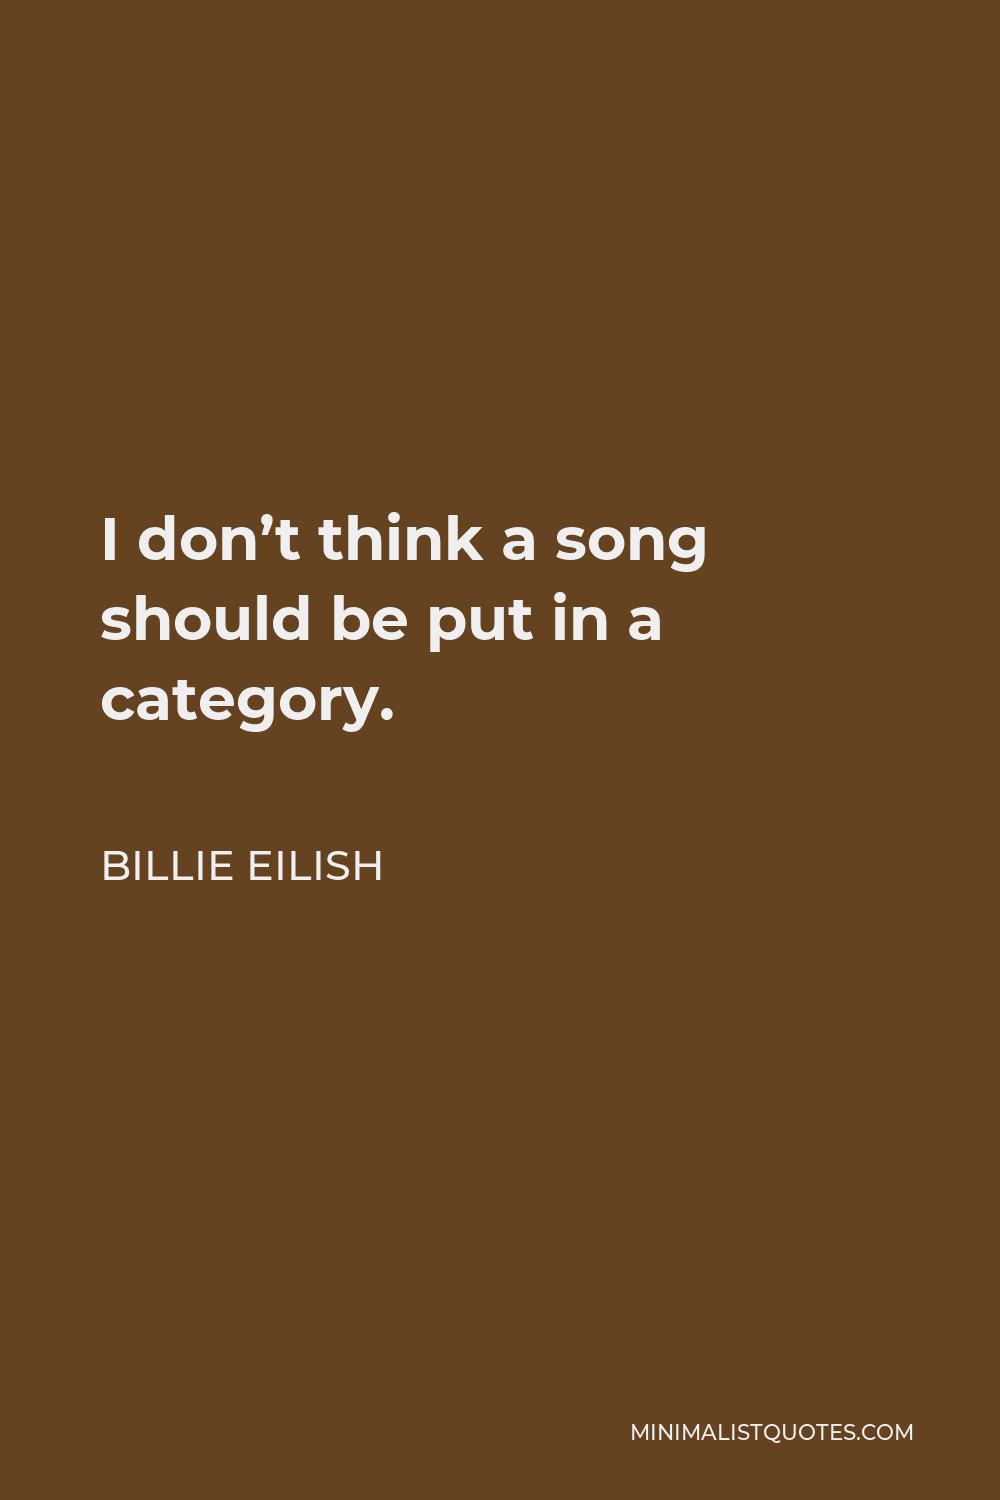 Billie Eilish Quote - I don’t think a song should be put in a category.